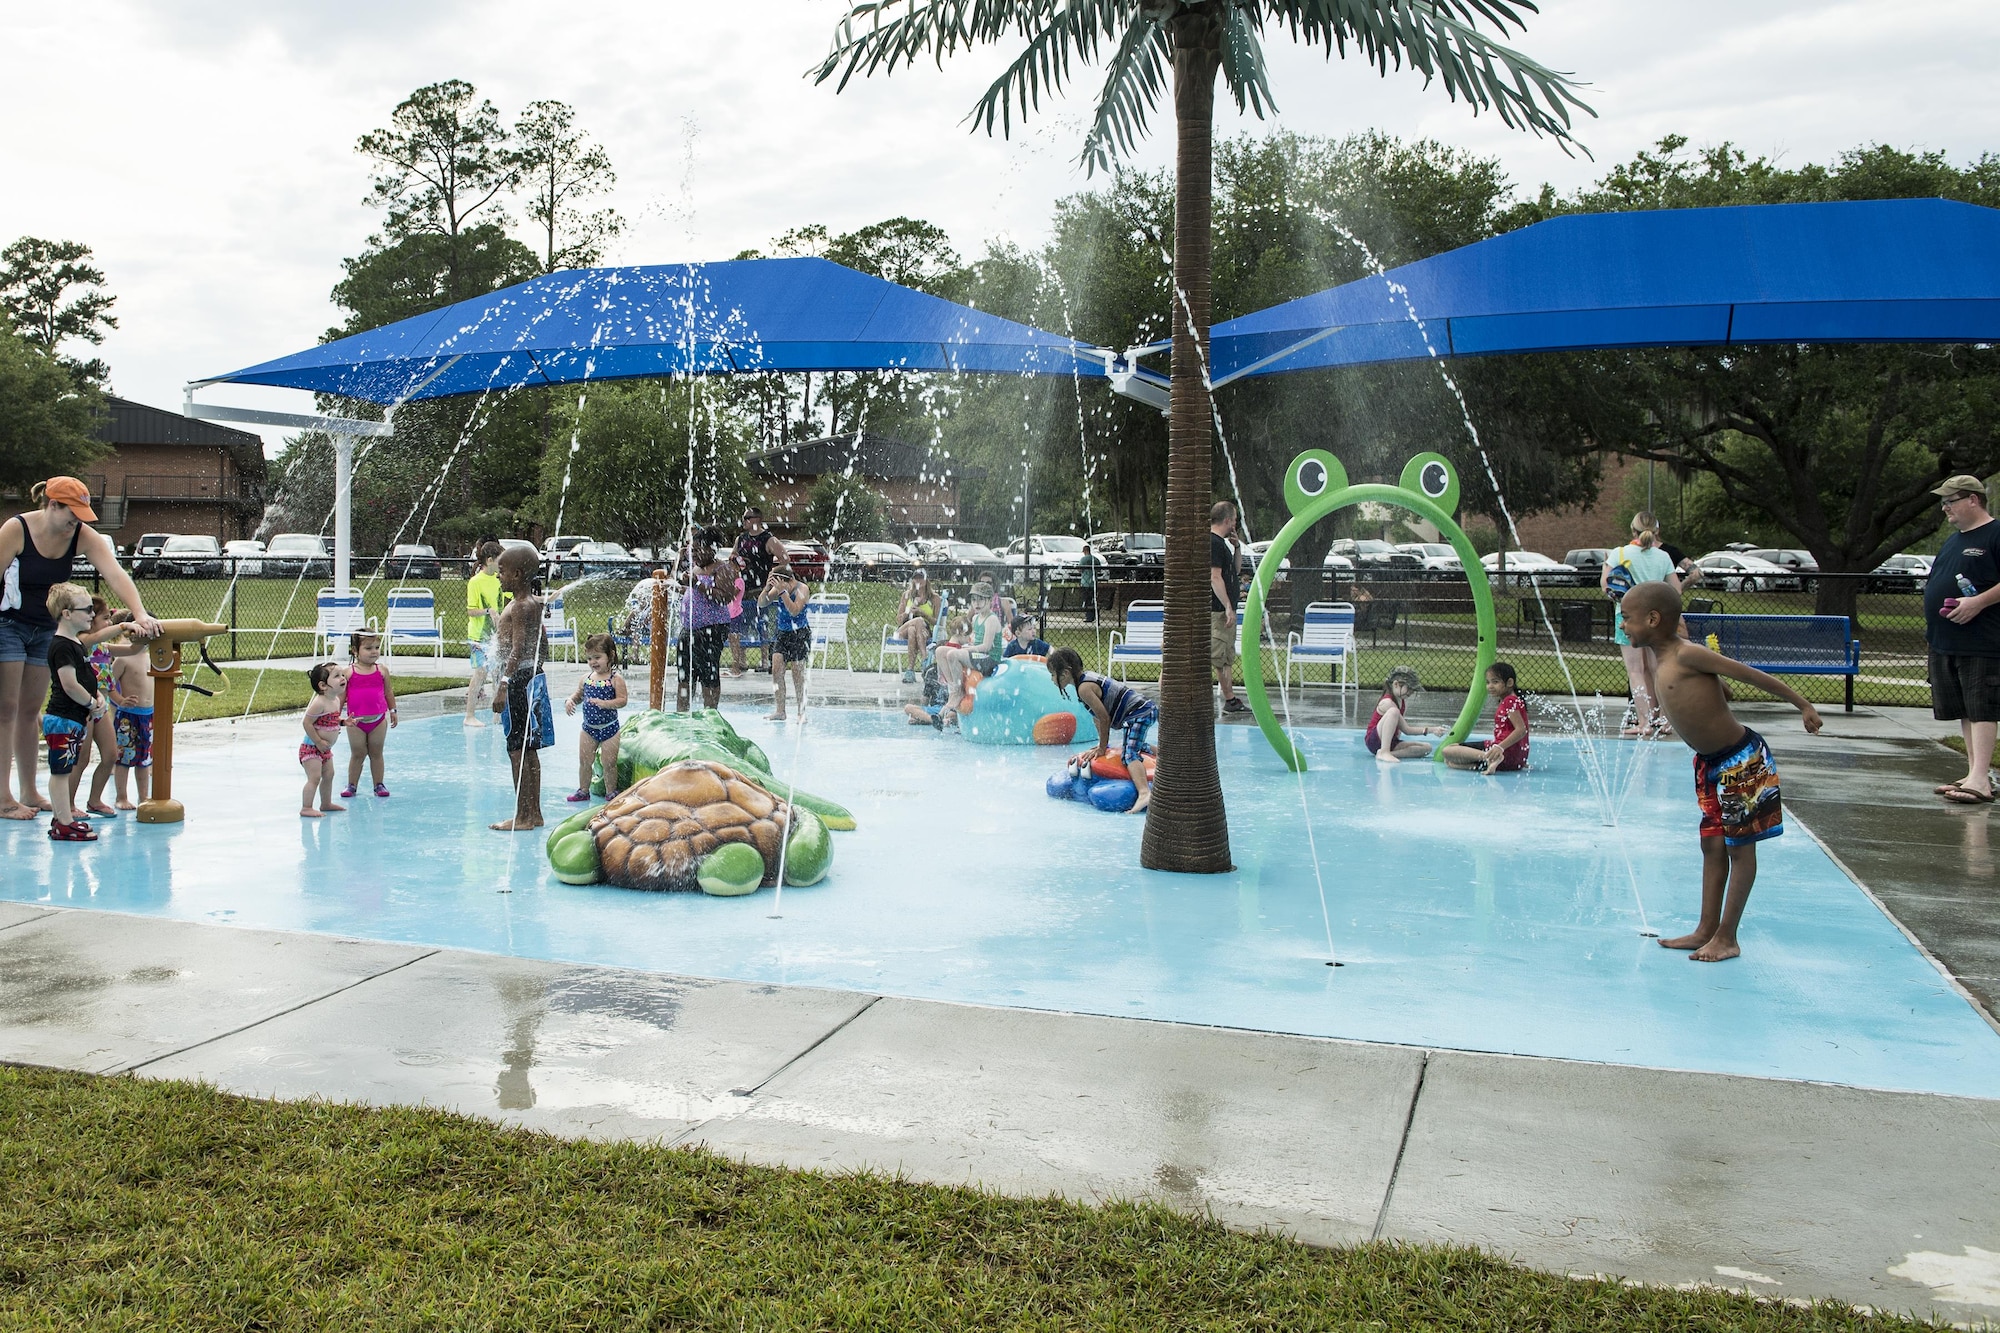 Attendees play on a splash pad during the Moody Summer Block Party, June 2, 2017, at Moody Air Force Base, Ga. Members of Team Moody were encouraged to attend the event which offered a plethora of activities for all ages, including water slides, volleyball tournaments, a car show, and live entertainment. (U.S. Air Force photo by Senior Airman Janiqua P. Robinson)